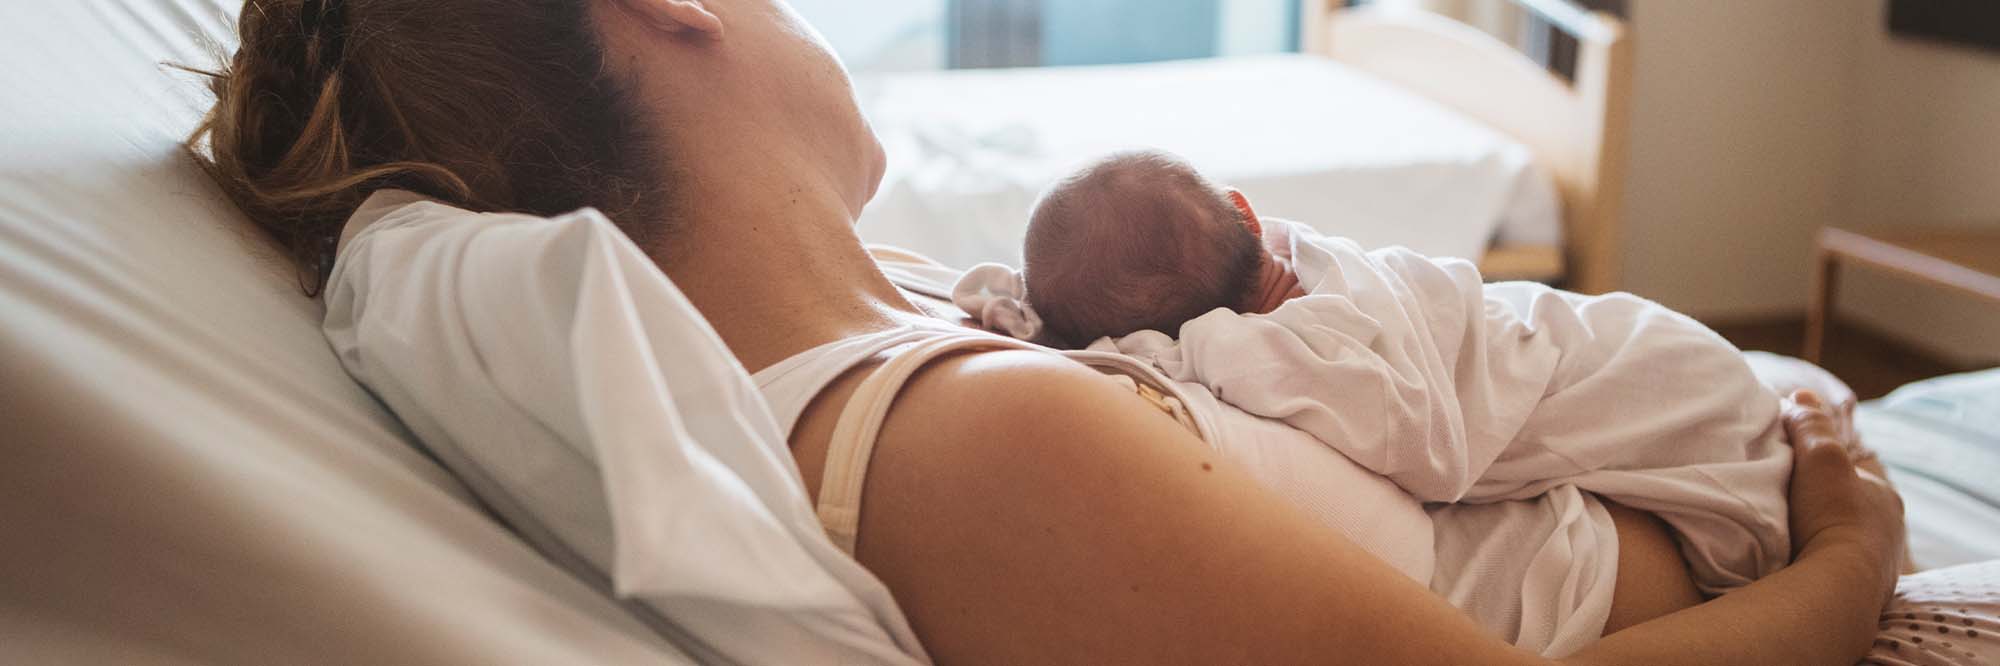 Postpartum Recovery: How To Take Care Of Yourself After Giving Birth?